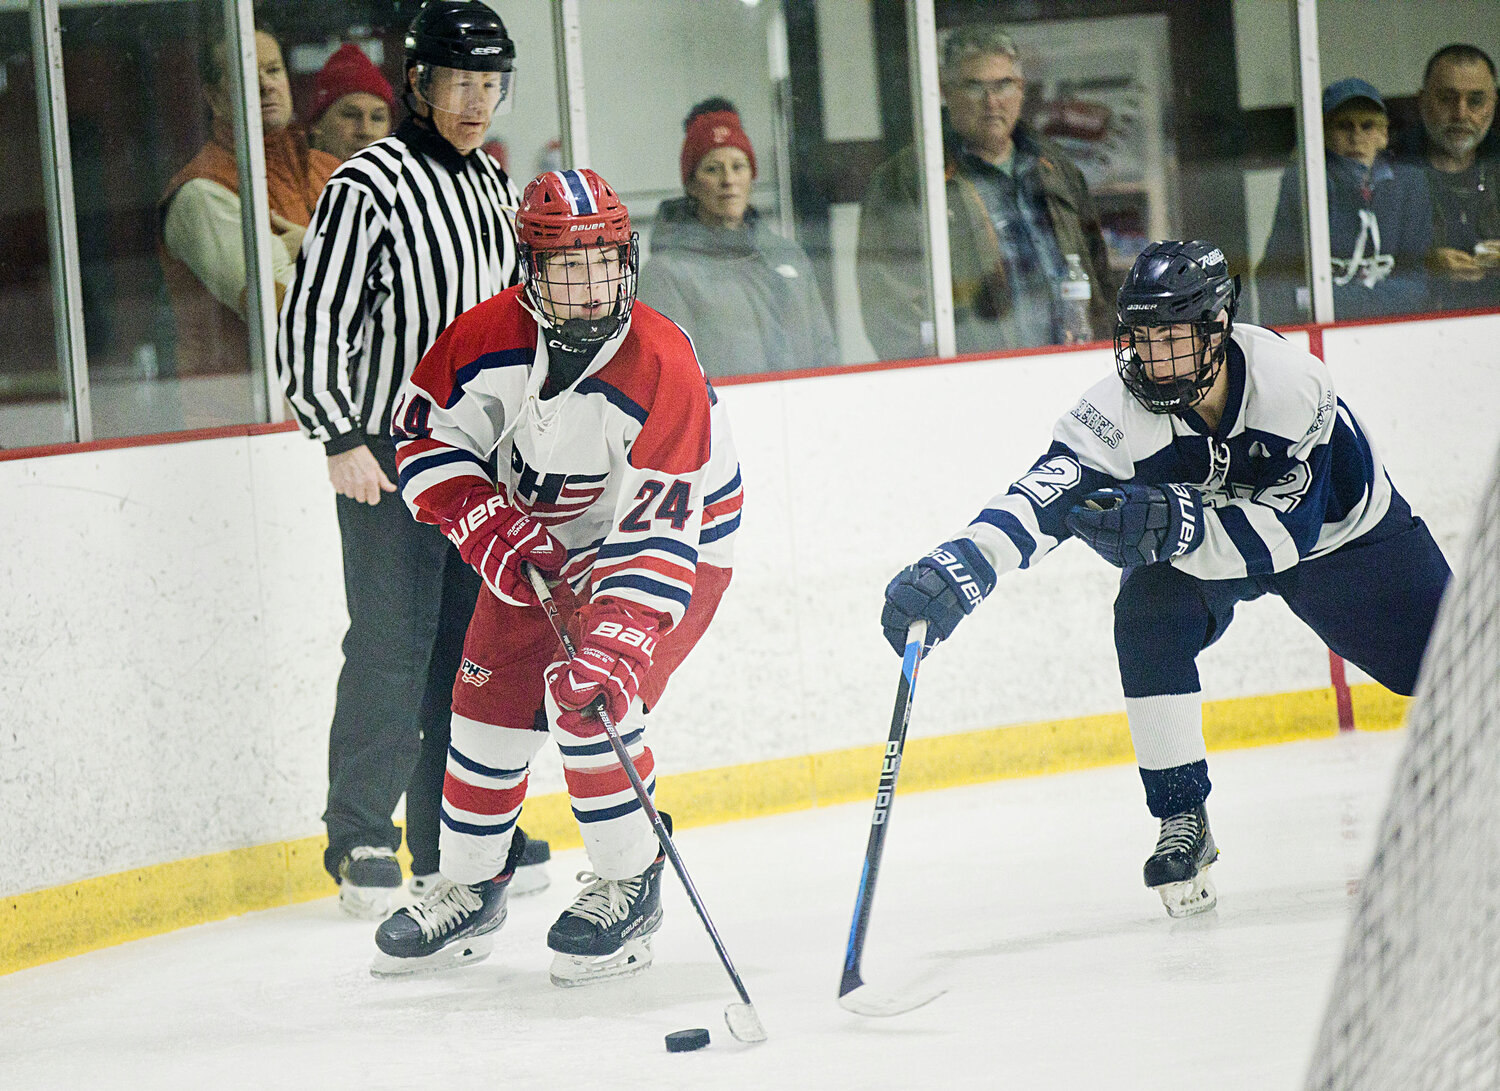 Luke Brule skates around the back of the net while controlling the puck for Portsmouth.